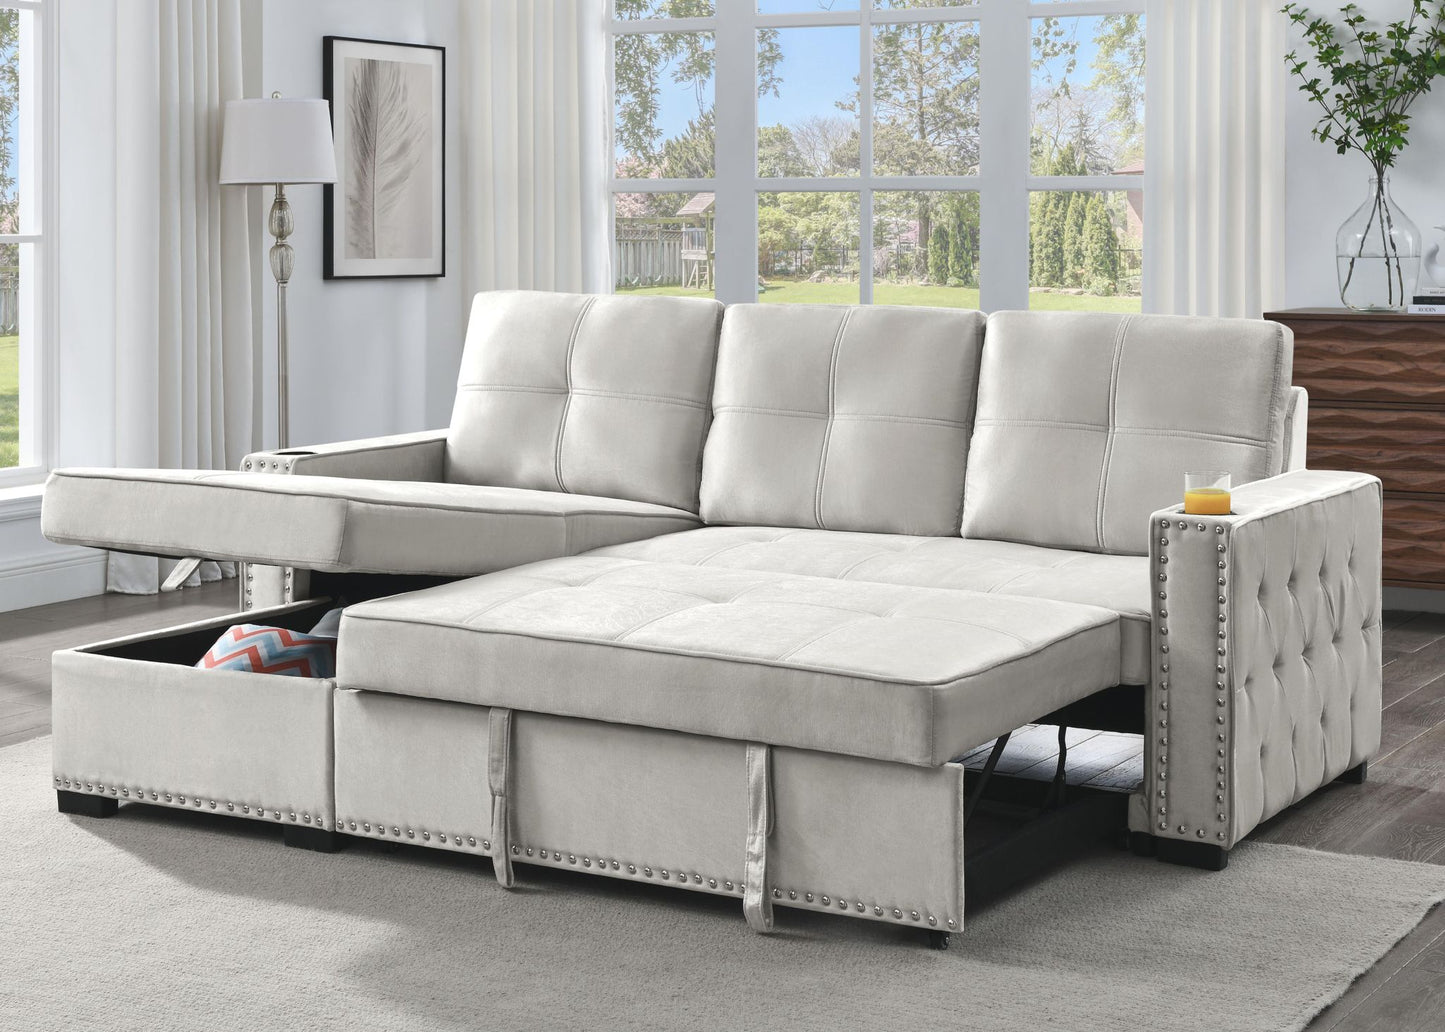 (401 NH MCDONALDS IVORY)- FABRIC- REVERSIBLE SECTIONAL SOFA- WITH PULL OUT BED